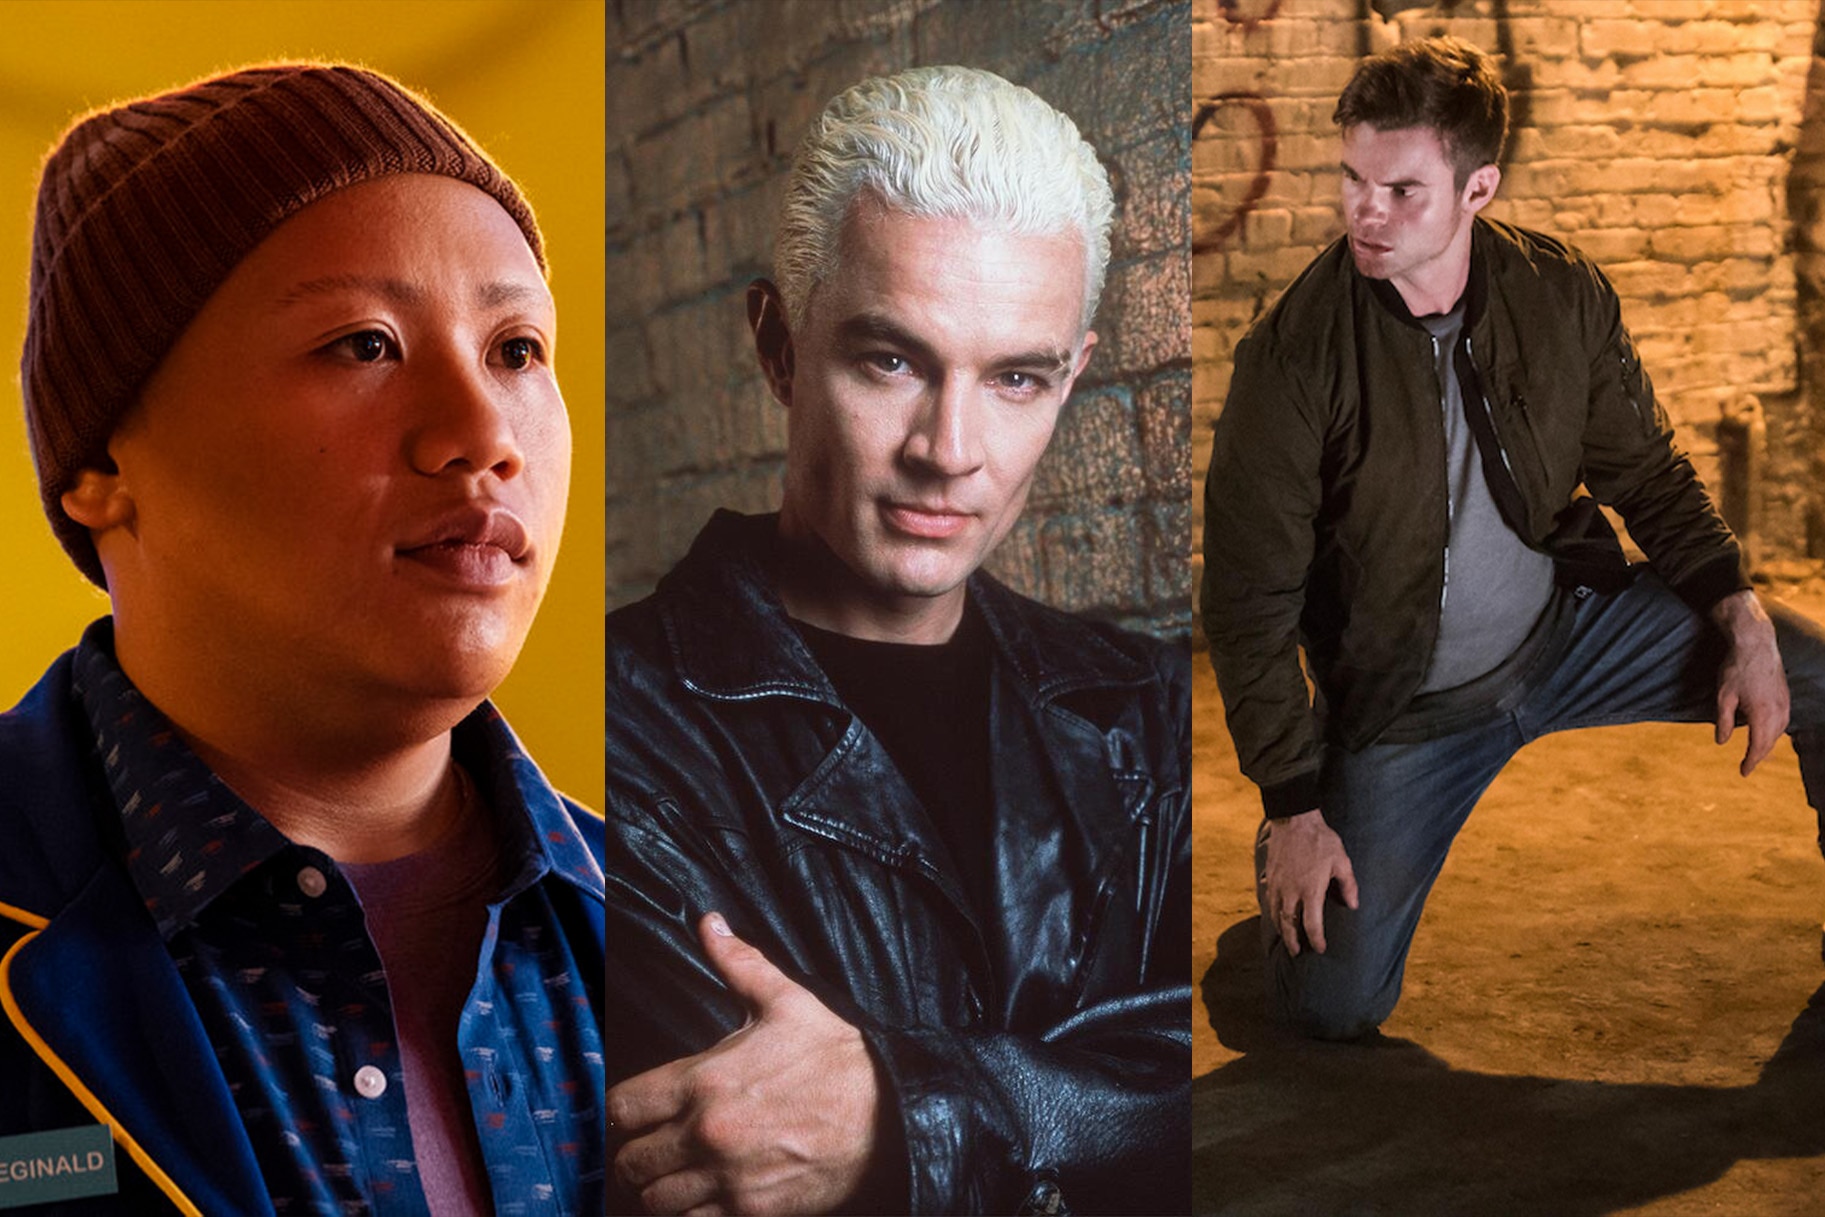 Jacob Batalon in Reginald the Vampire, James Marsters as Spike in "Buffy The Vampire Slayer Year 5", Daniel Gillies as Elijah Mikaelson in The Originals